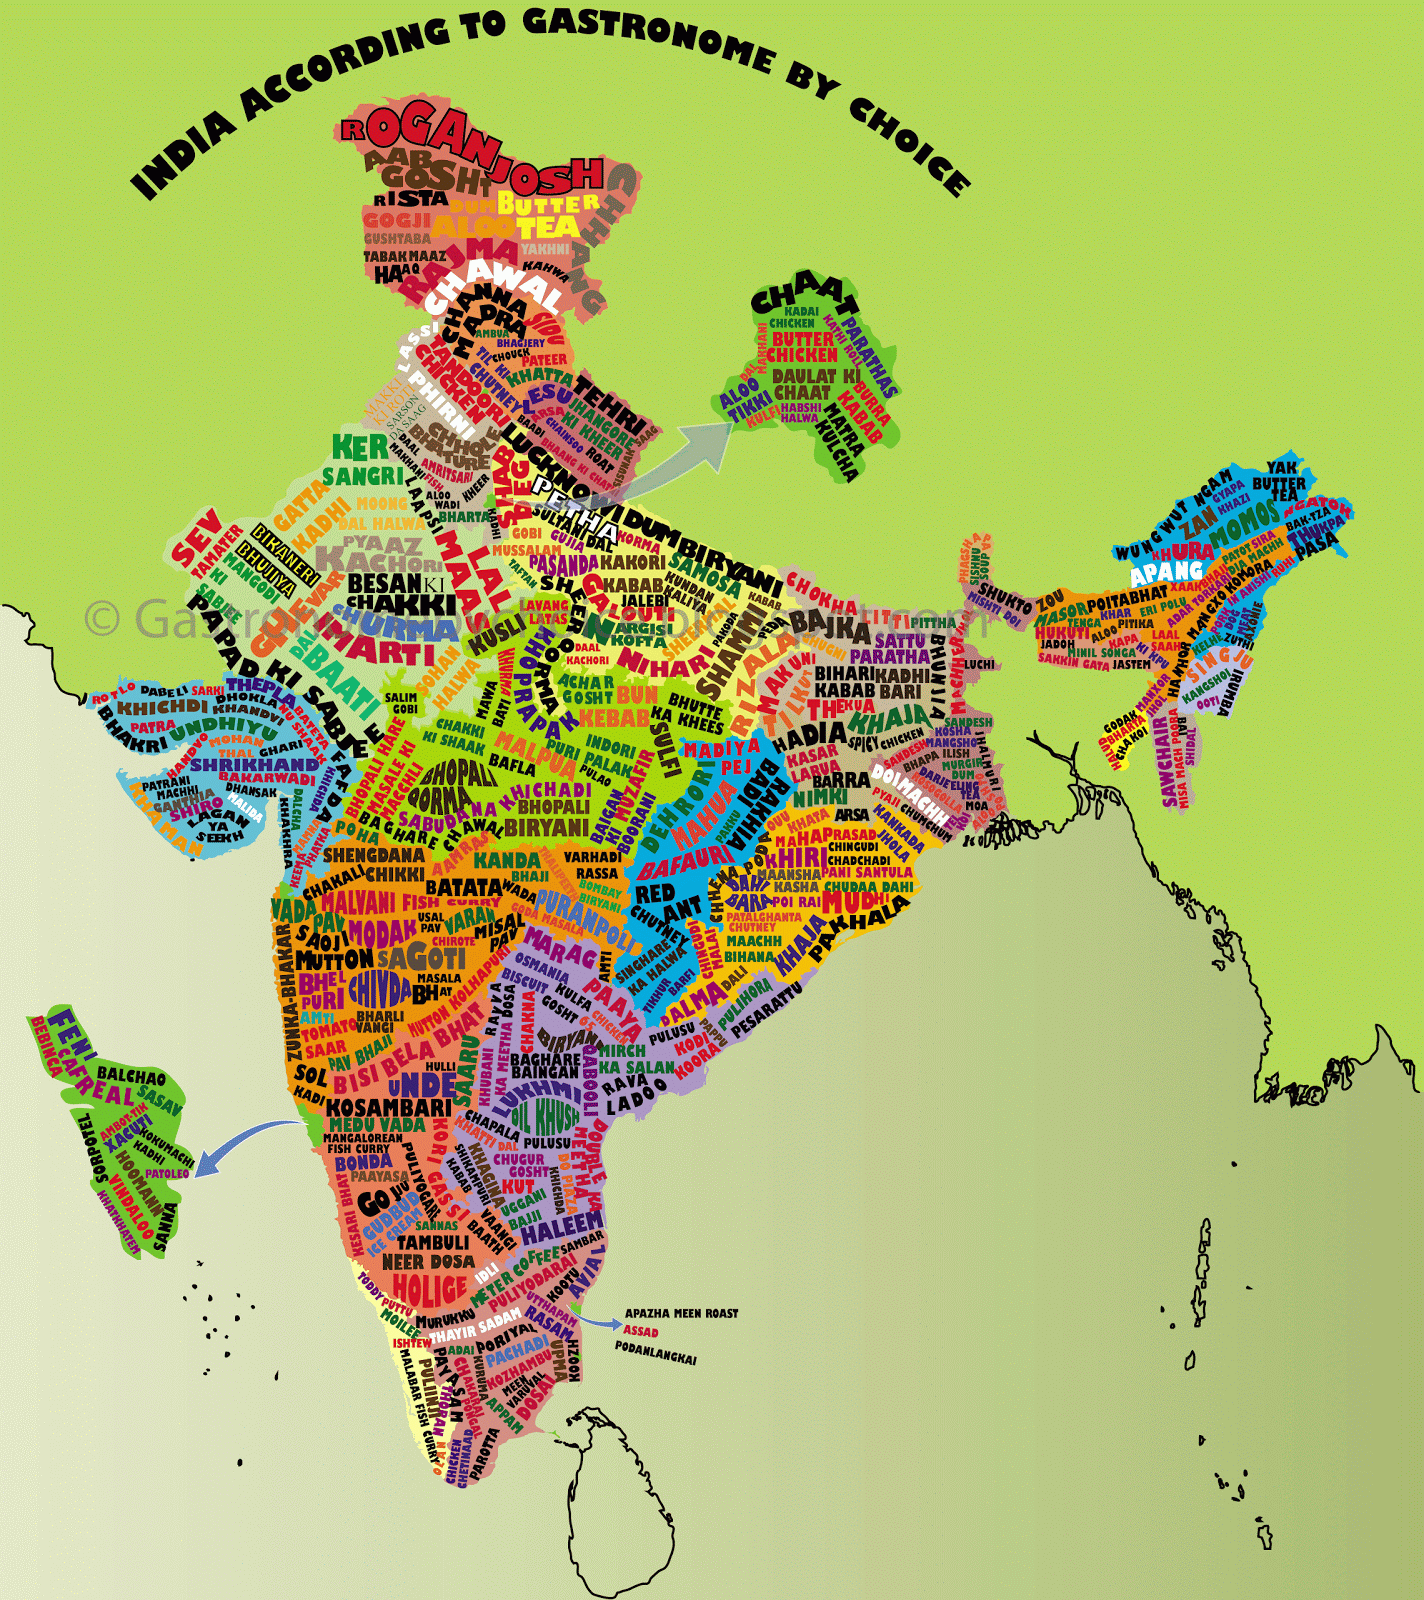 India According to Gastronome by Choice ~ Gastronome By Choice